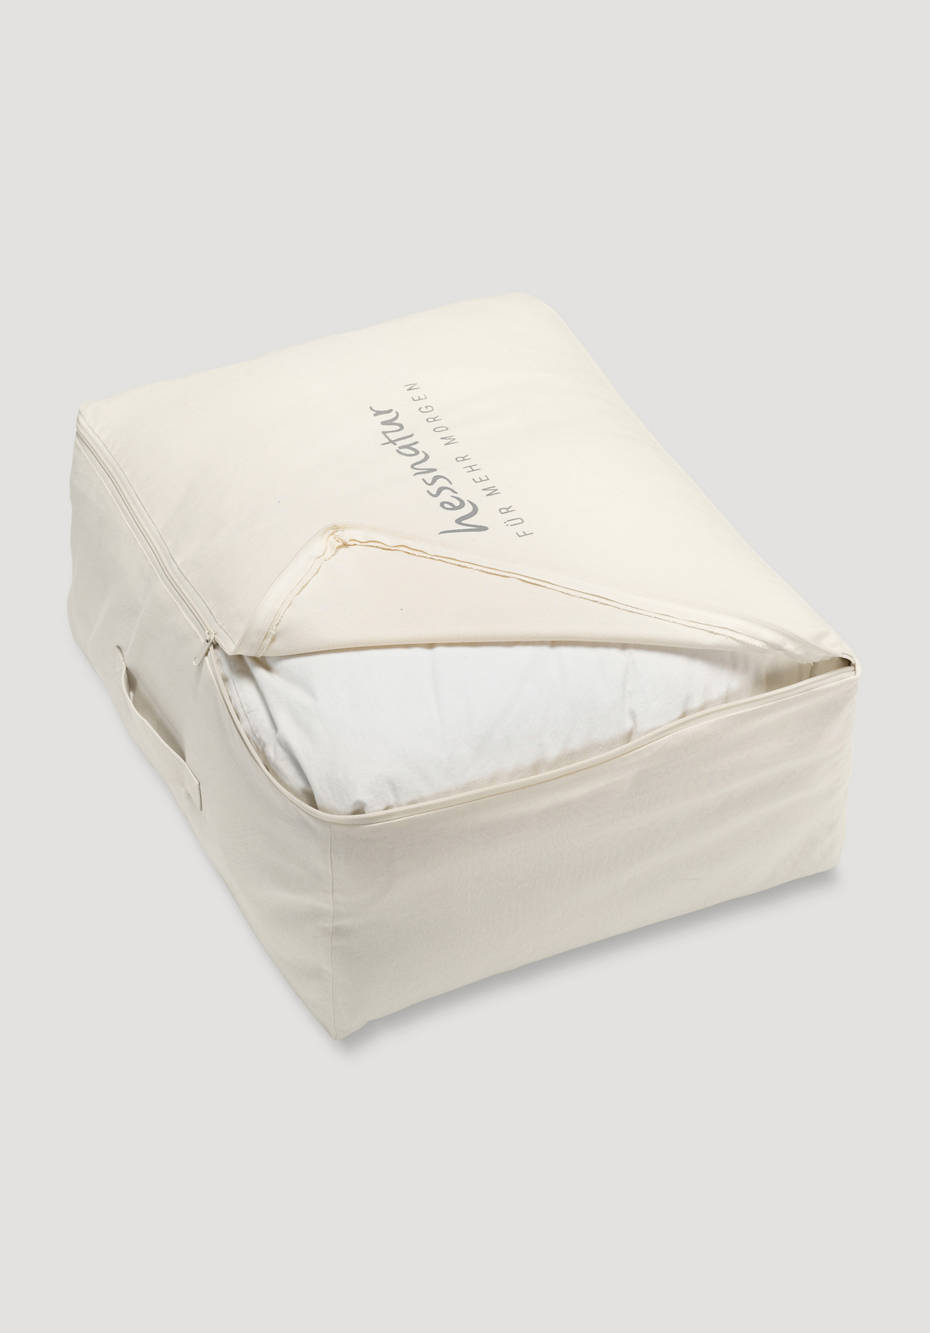 Bedding bag made from pure organic cotton